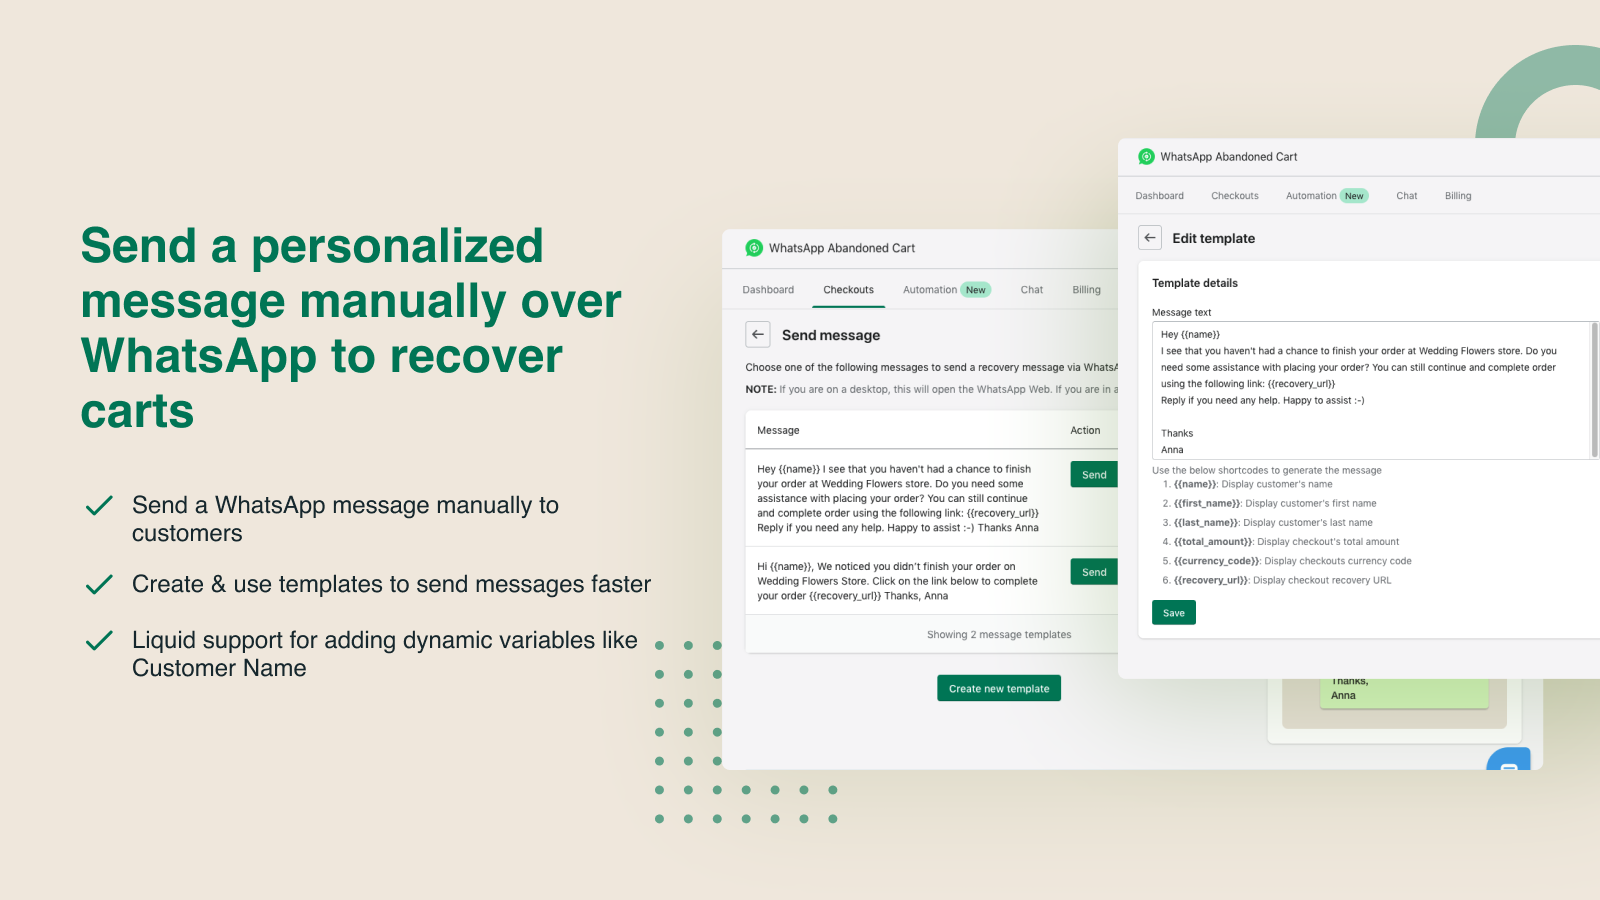 Send personalised WhatsApp messages to recover carts manually